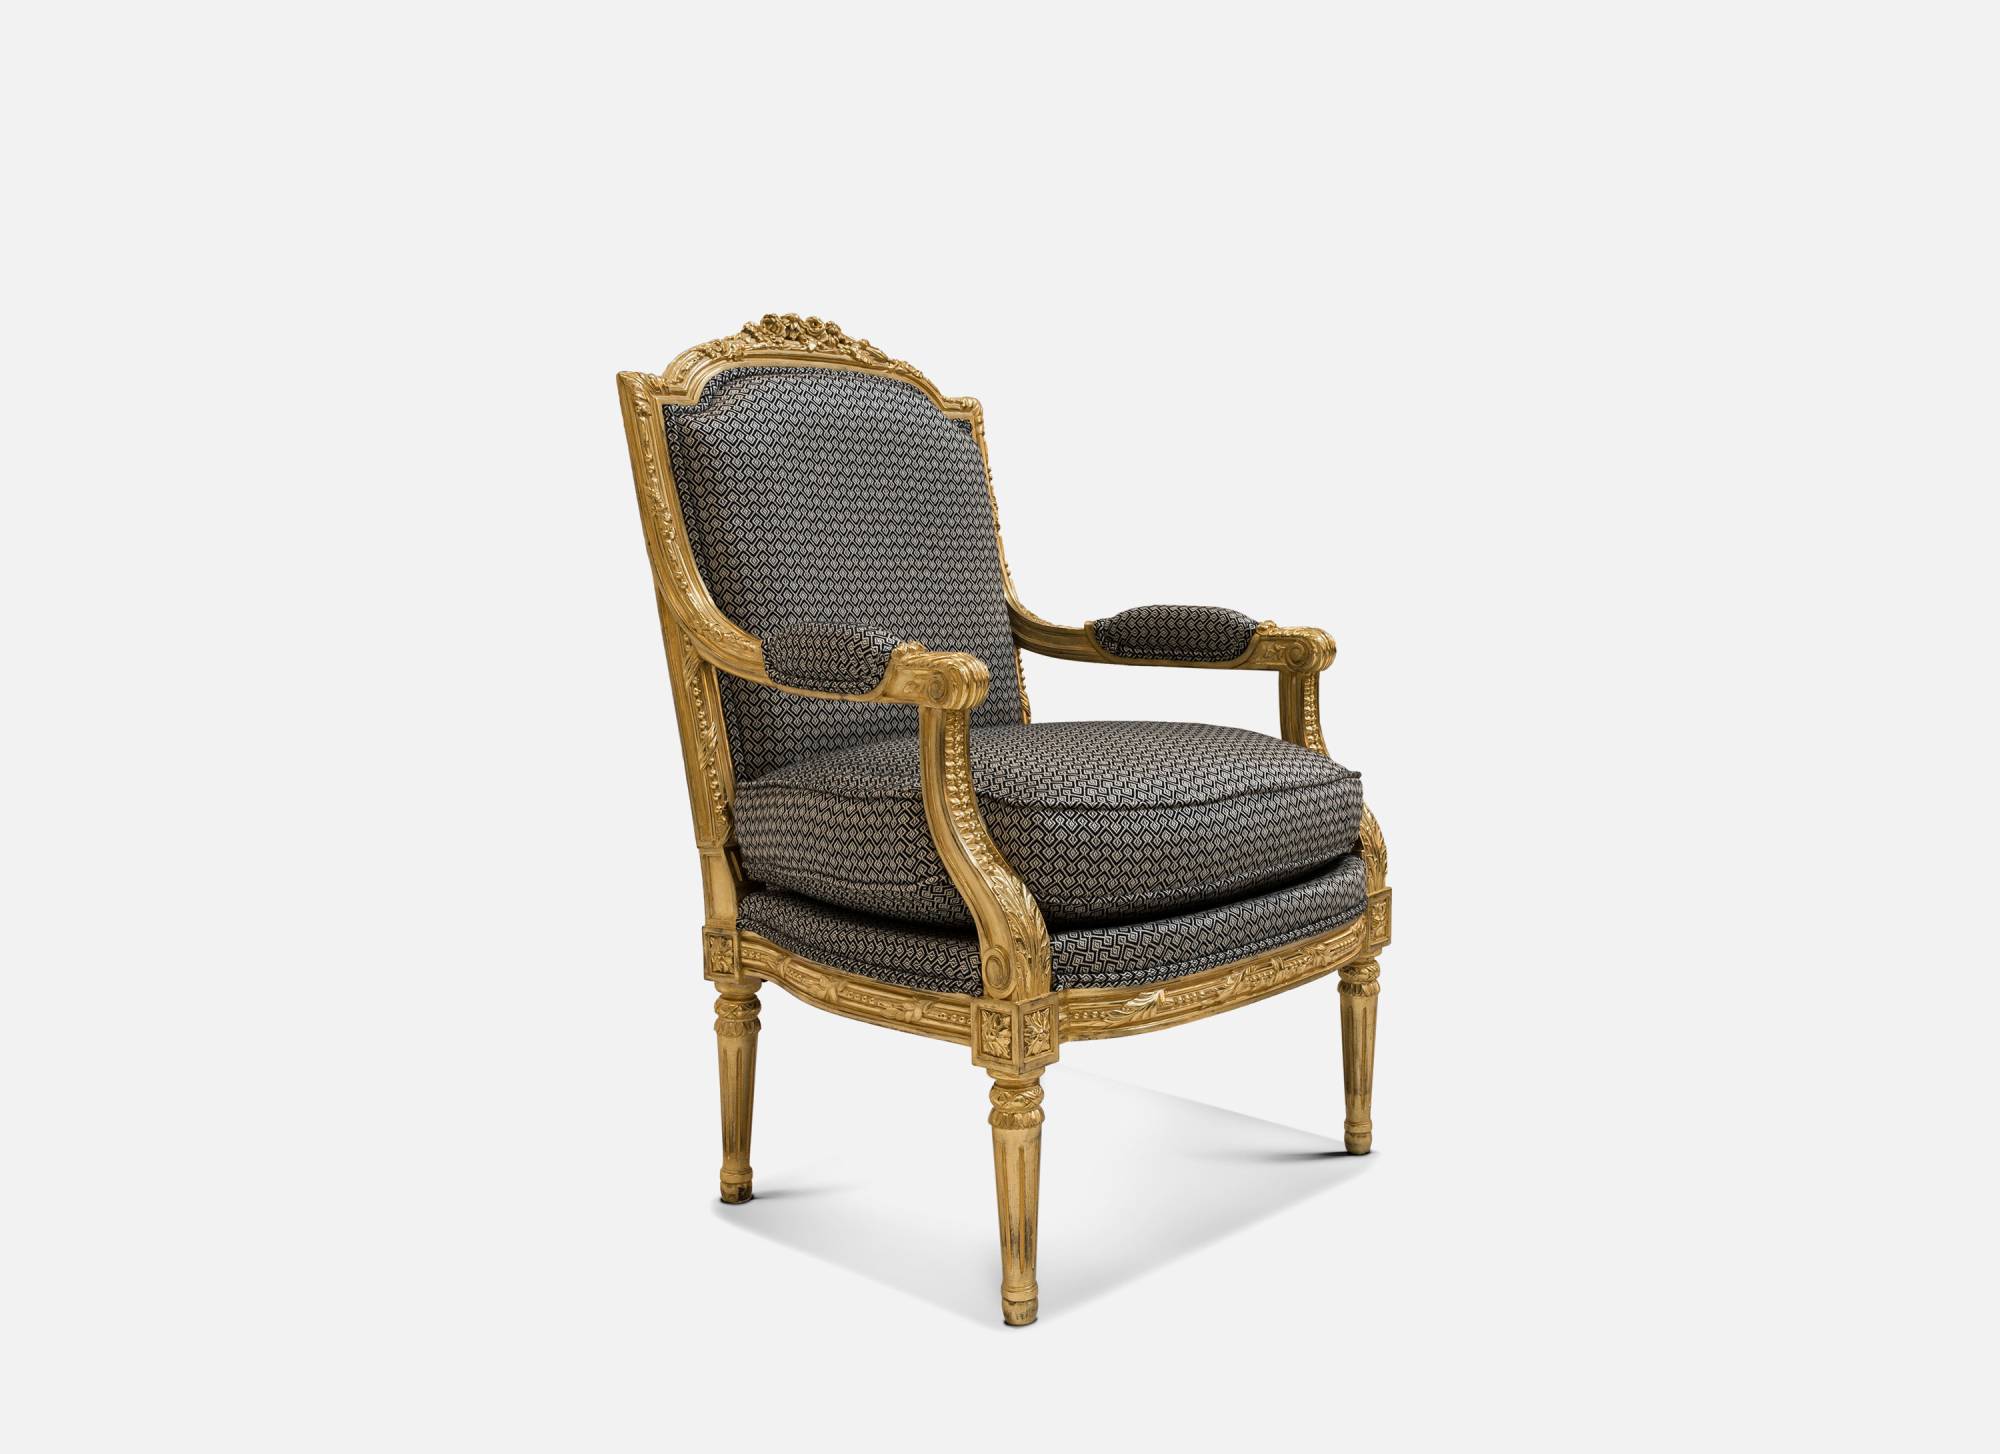 ART. 1049-19 - C.G. Capelletti quality furniture and timeless elegance with luxury made in italy contemporary Armchairs.